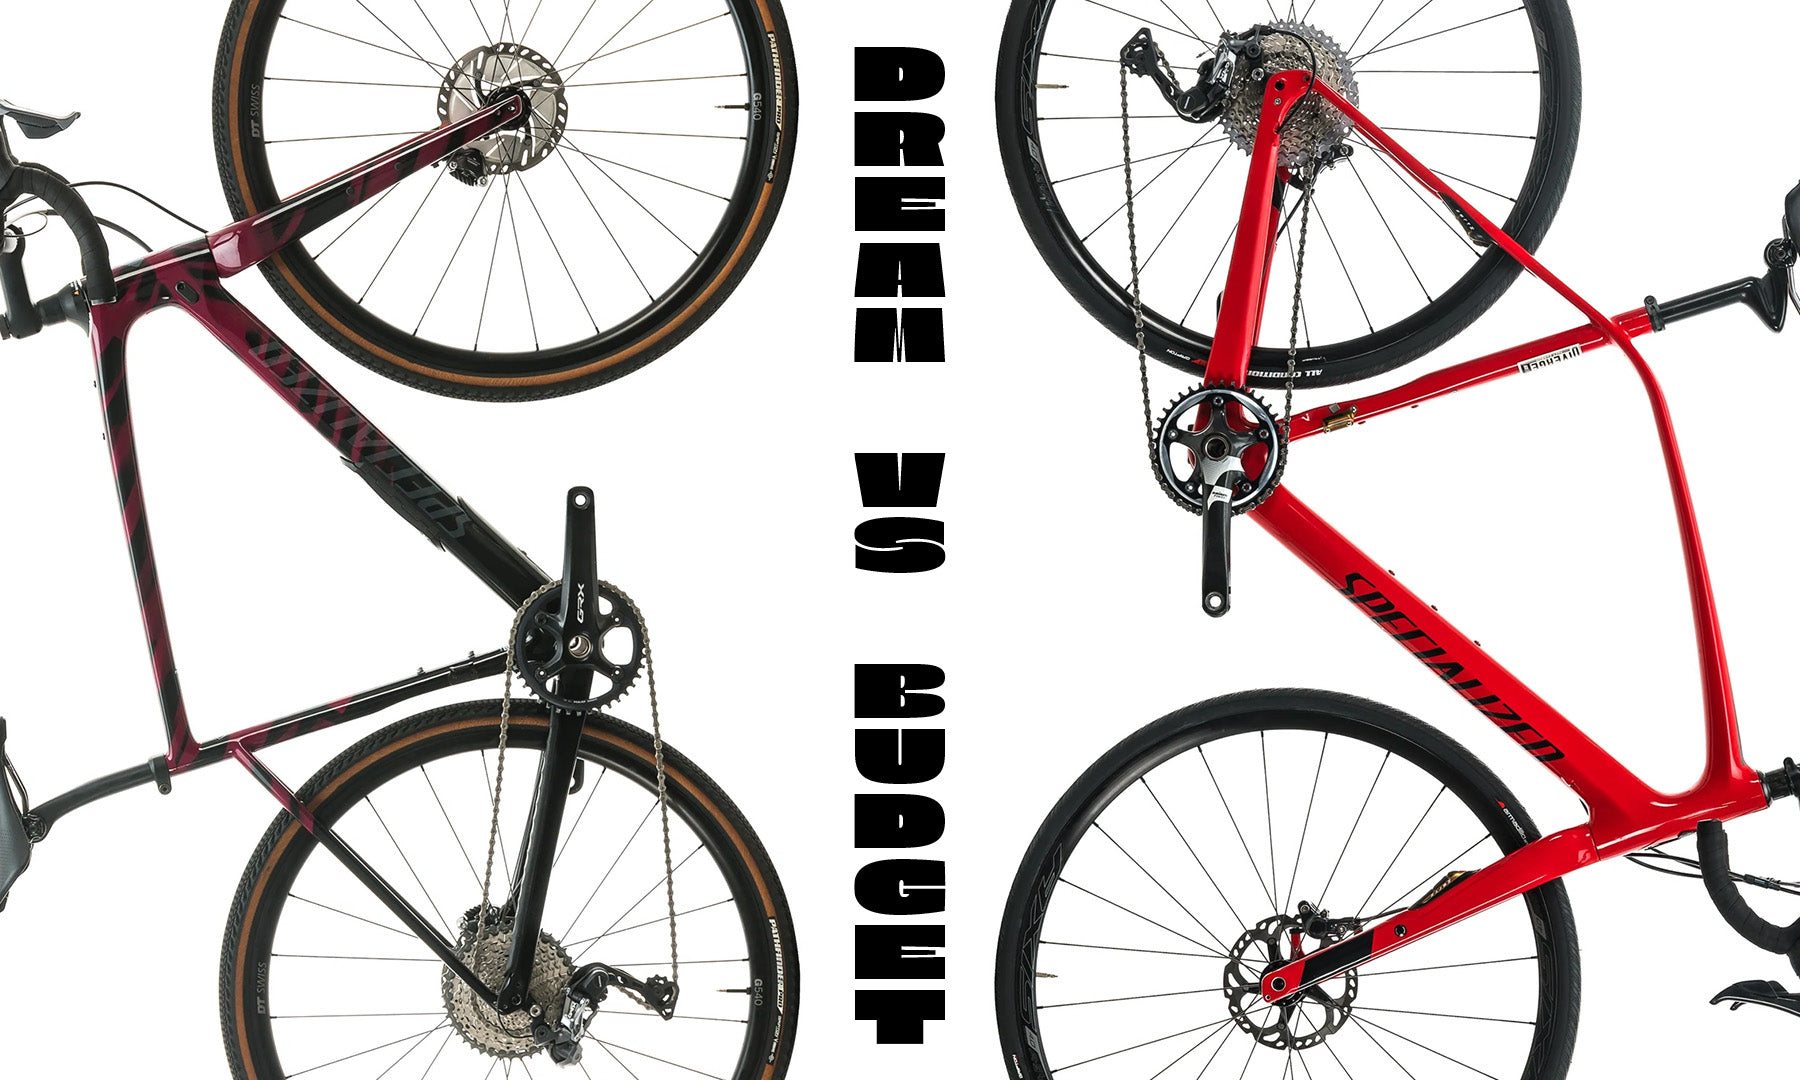 Dueling Diverges: The 2021 vs. 2015 Specialized Diverge